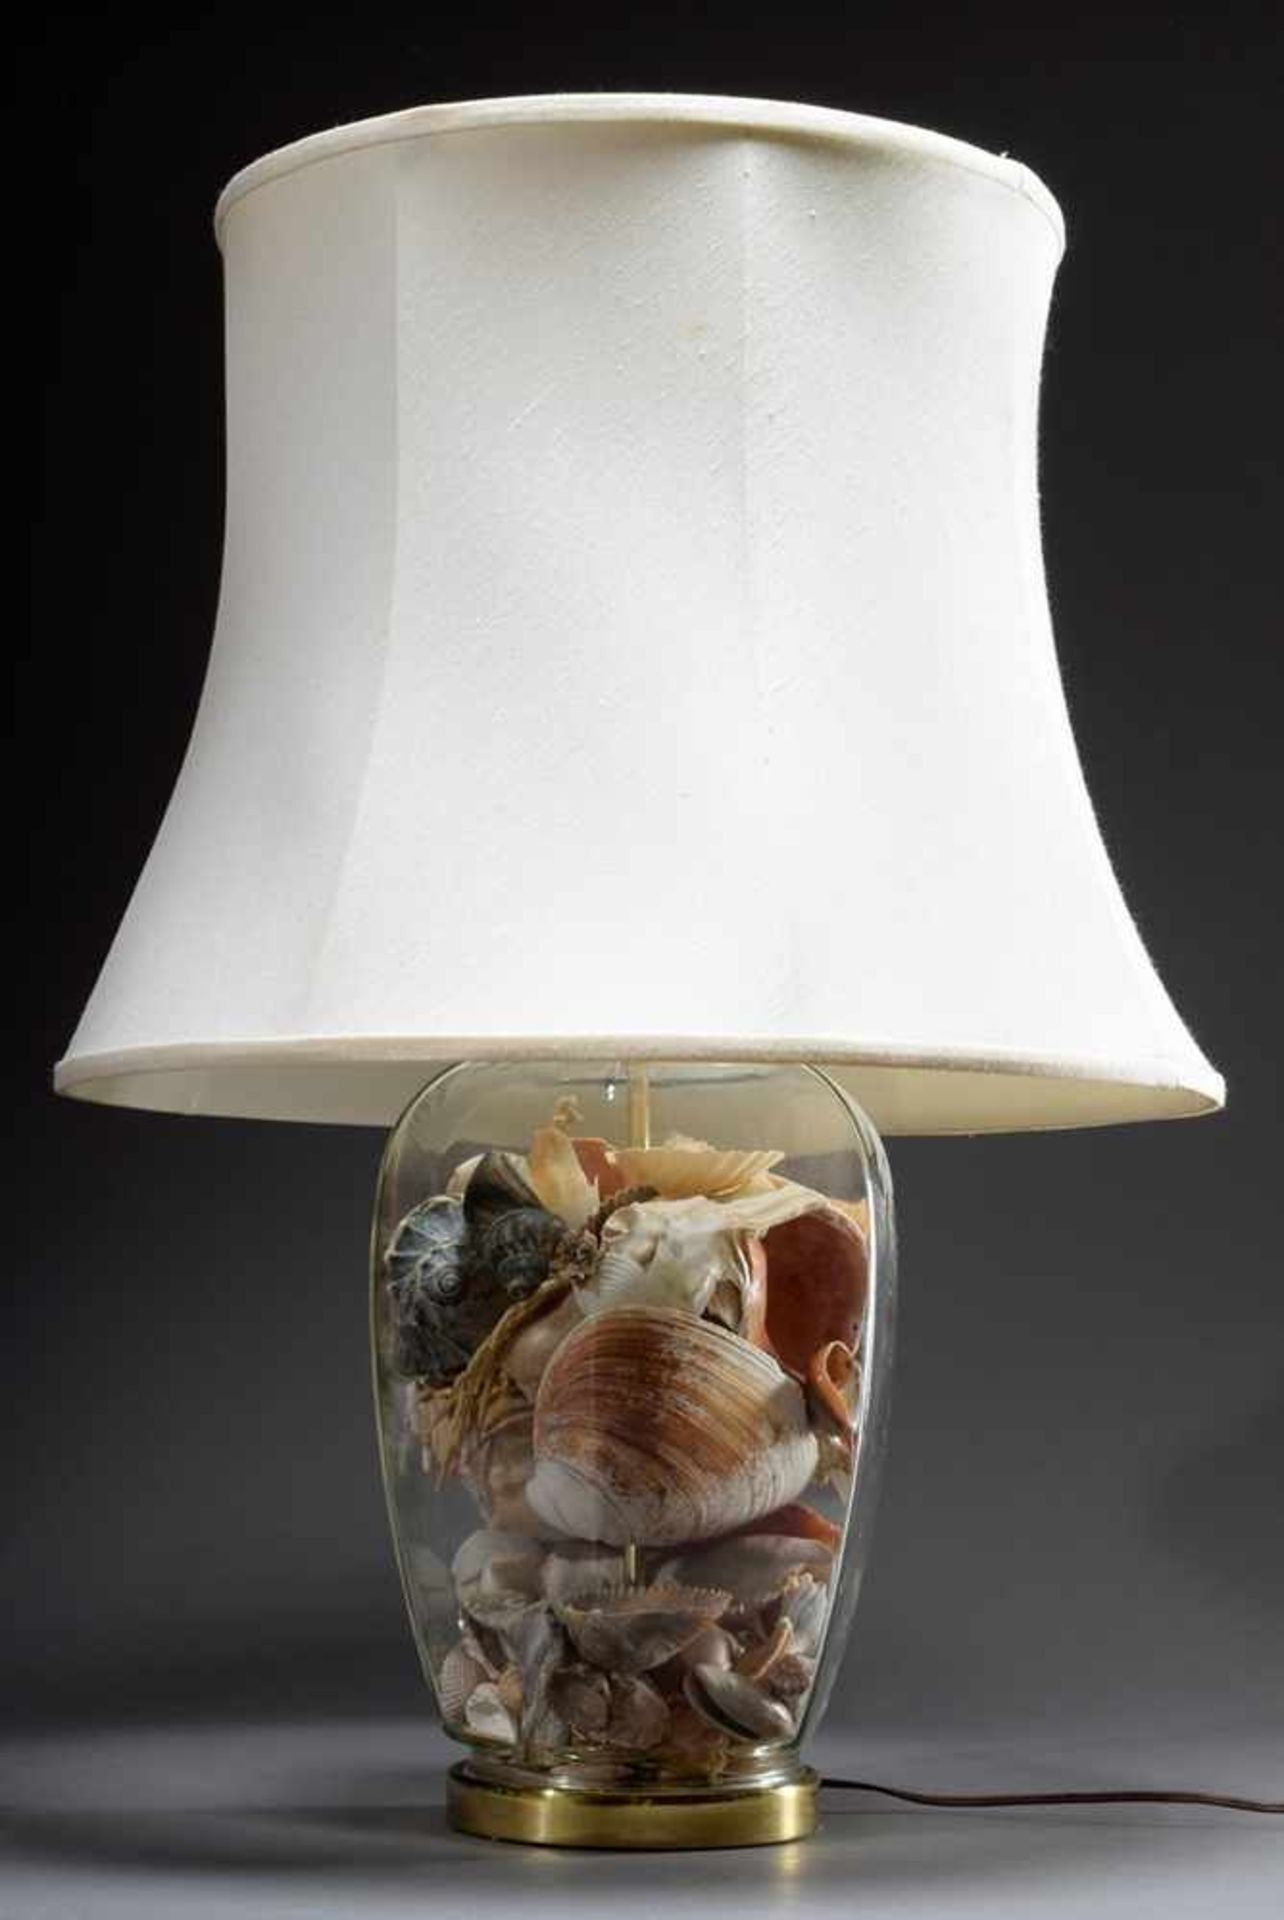 Modern table lamp with shells in glass body, brass mounted, America 20.century, h. 61cmModerne